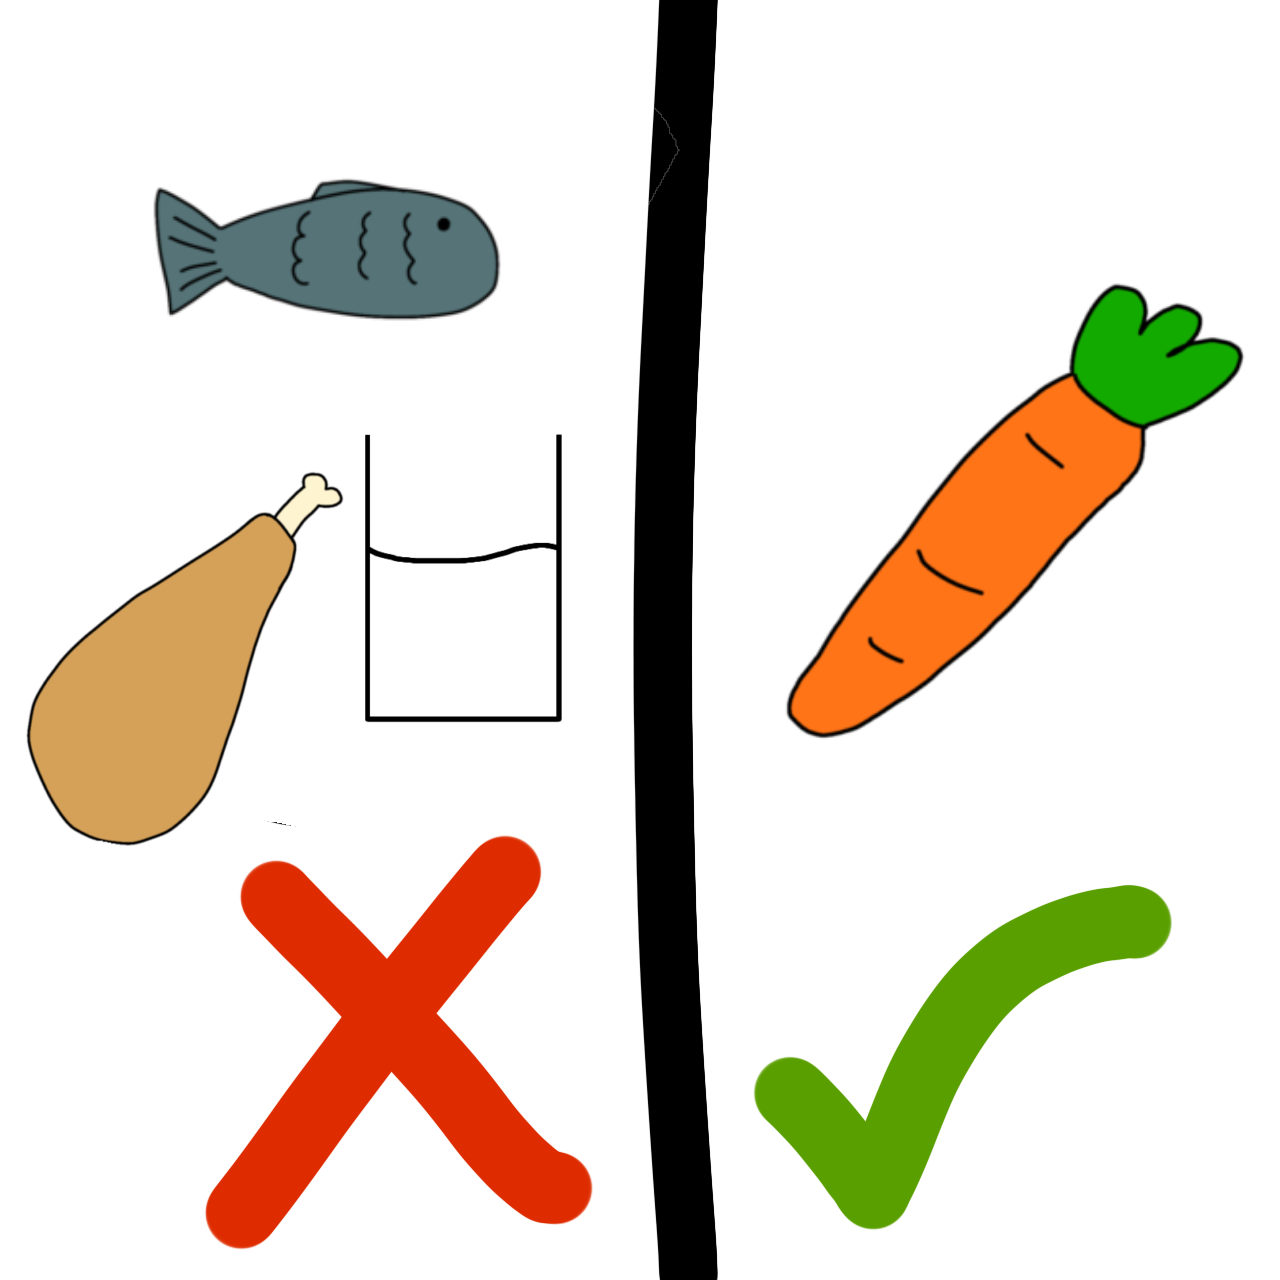 image is split in half. On one side is fish, glass of milk and chicken leg, with a red X. On the other side is carrot, with green tick